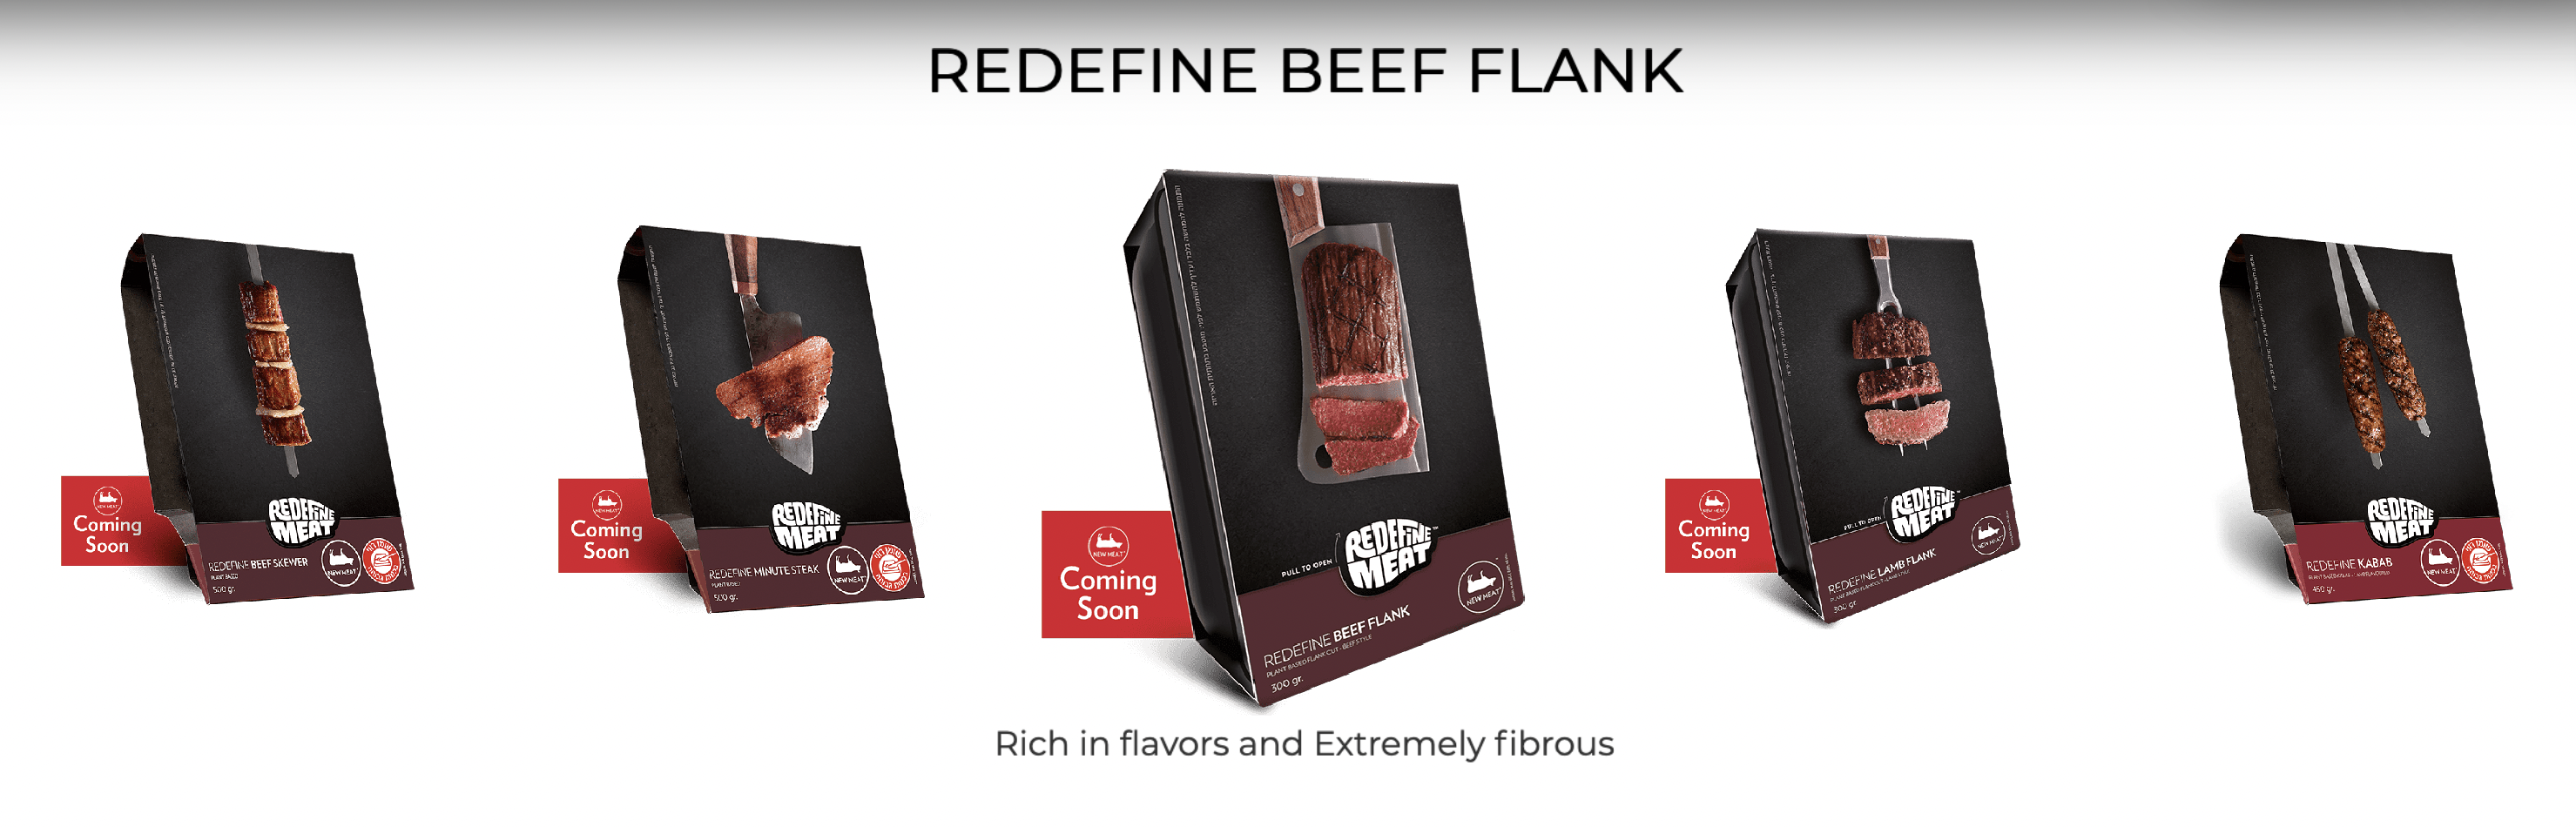 Redefine Meat's line of 3D printed alternative meats.